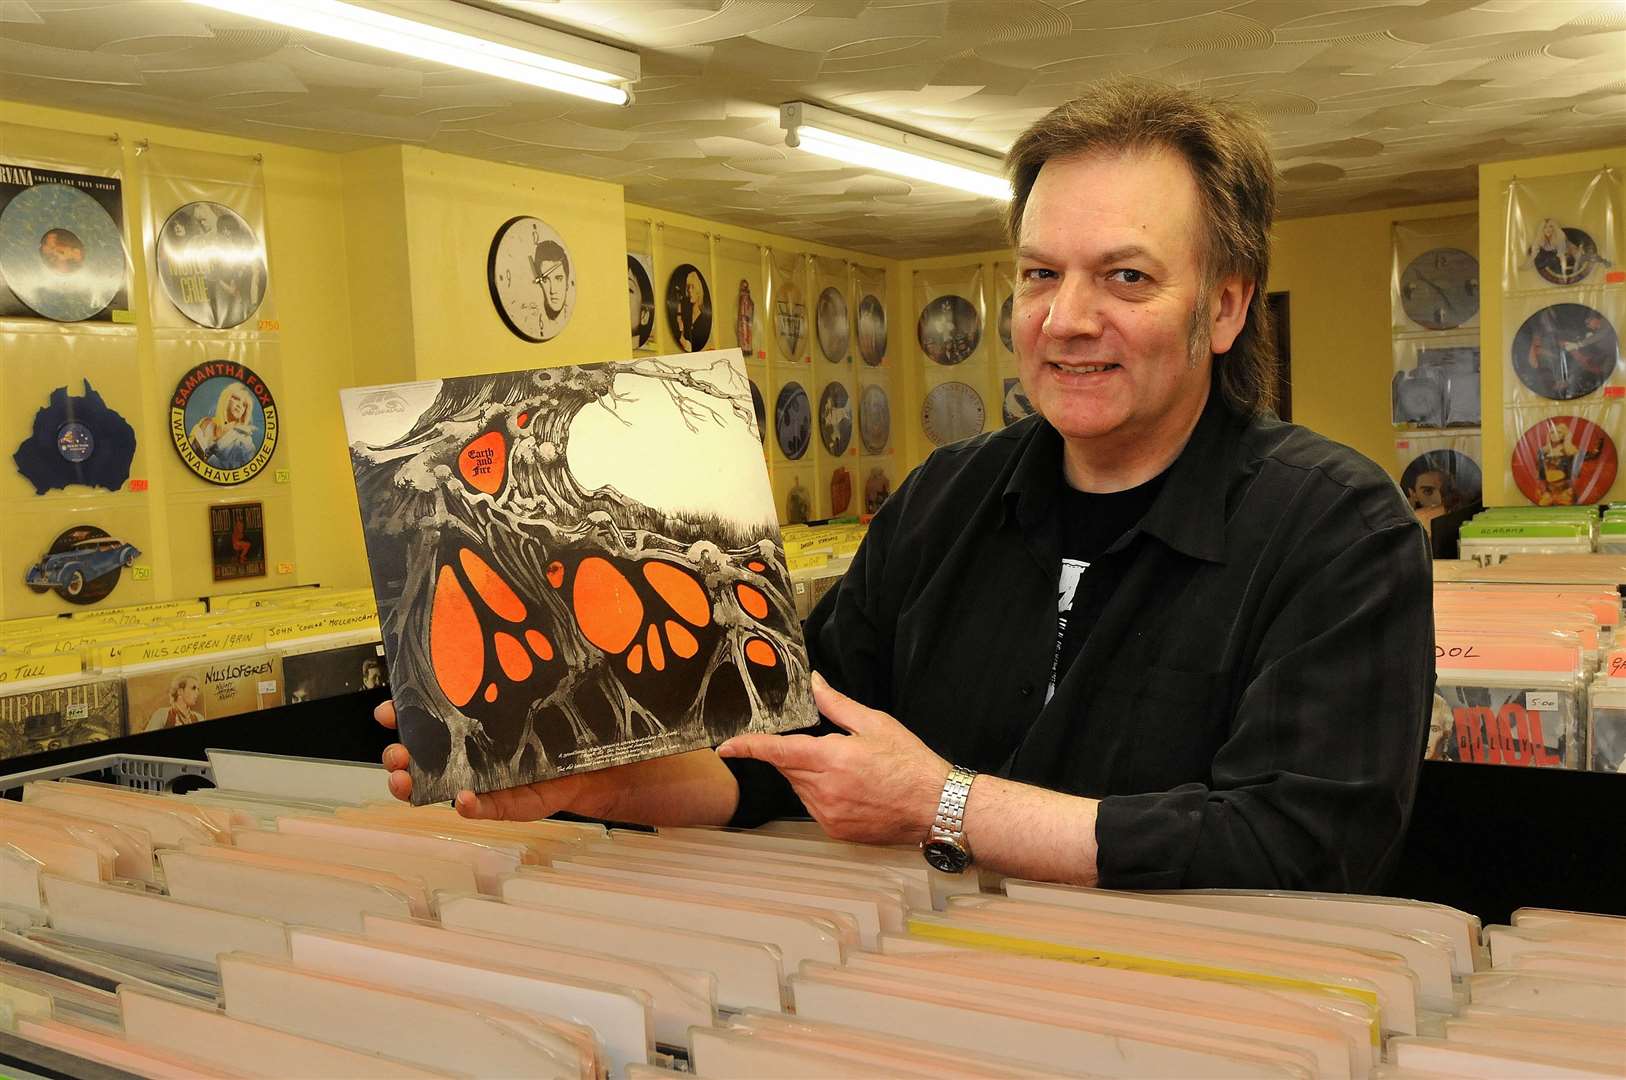 Tony Winfield has been seeling records since the 1960s